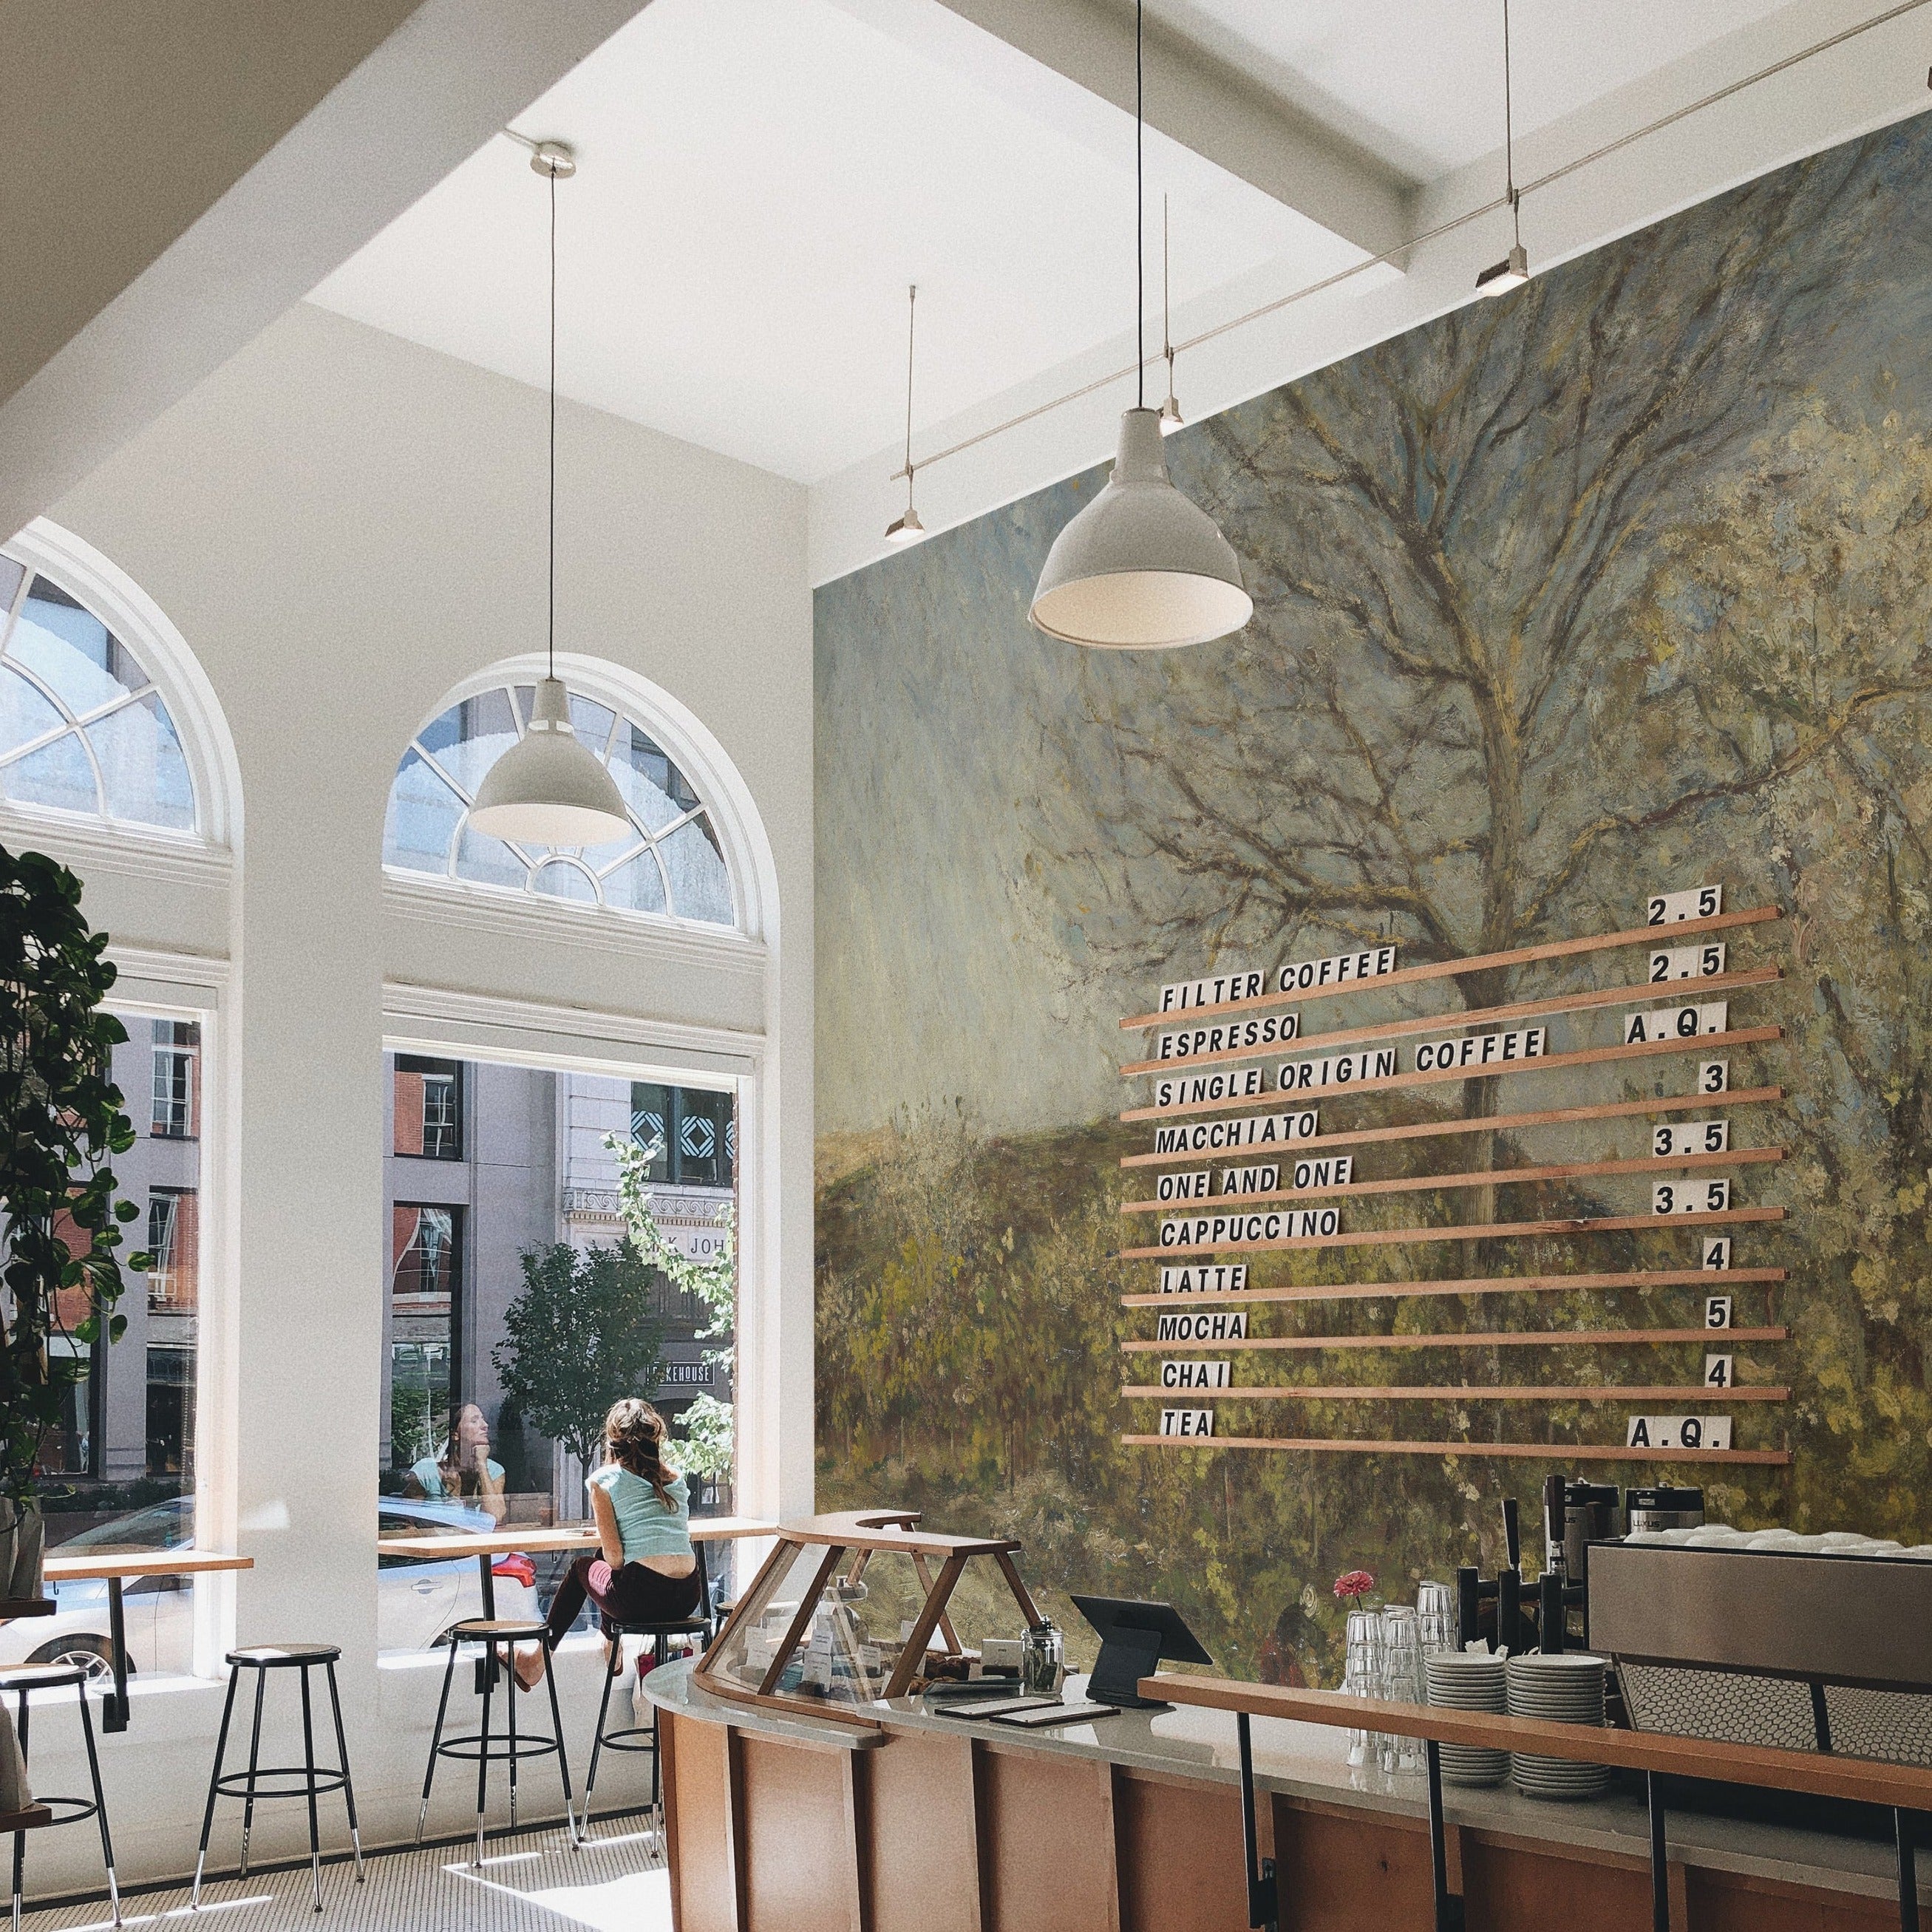 Coffee shop interior with a detailed landscape mural covering a large wall. The mural features a tree and vibrant foliage, adding a rustic charm to the modern cafe atmosphere, complete with wooden furniture and bright natural lighting.